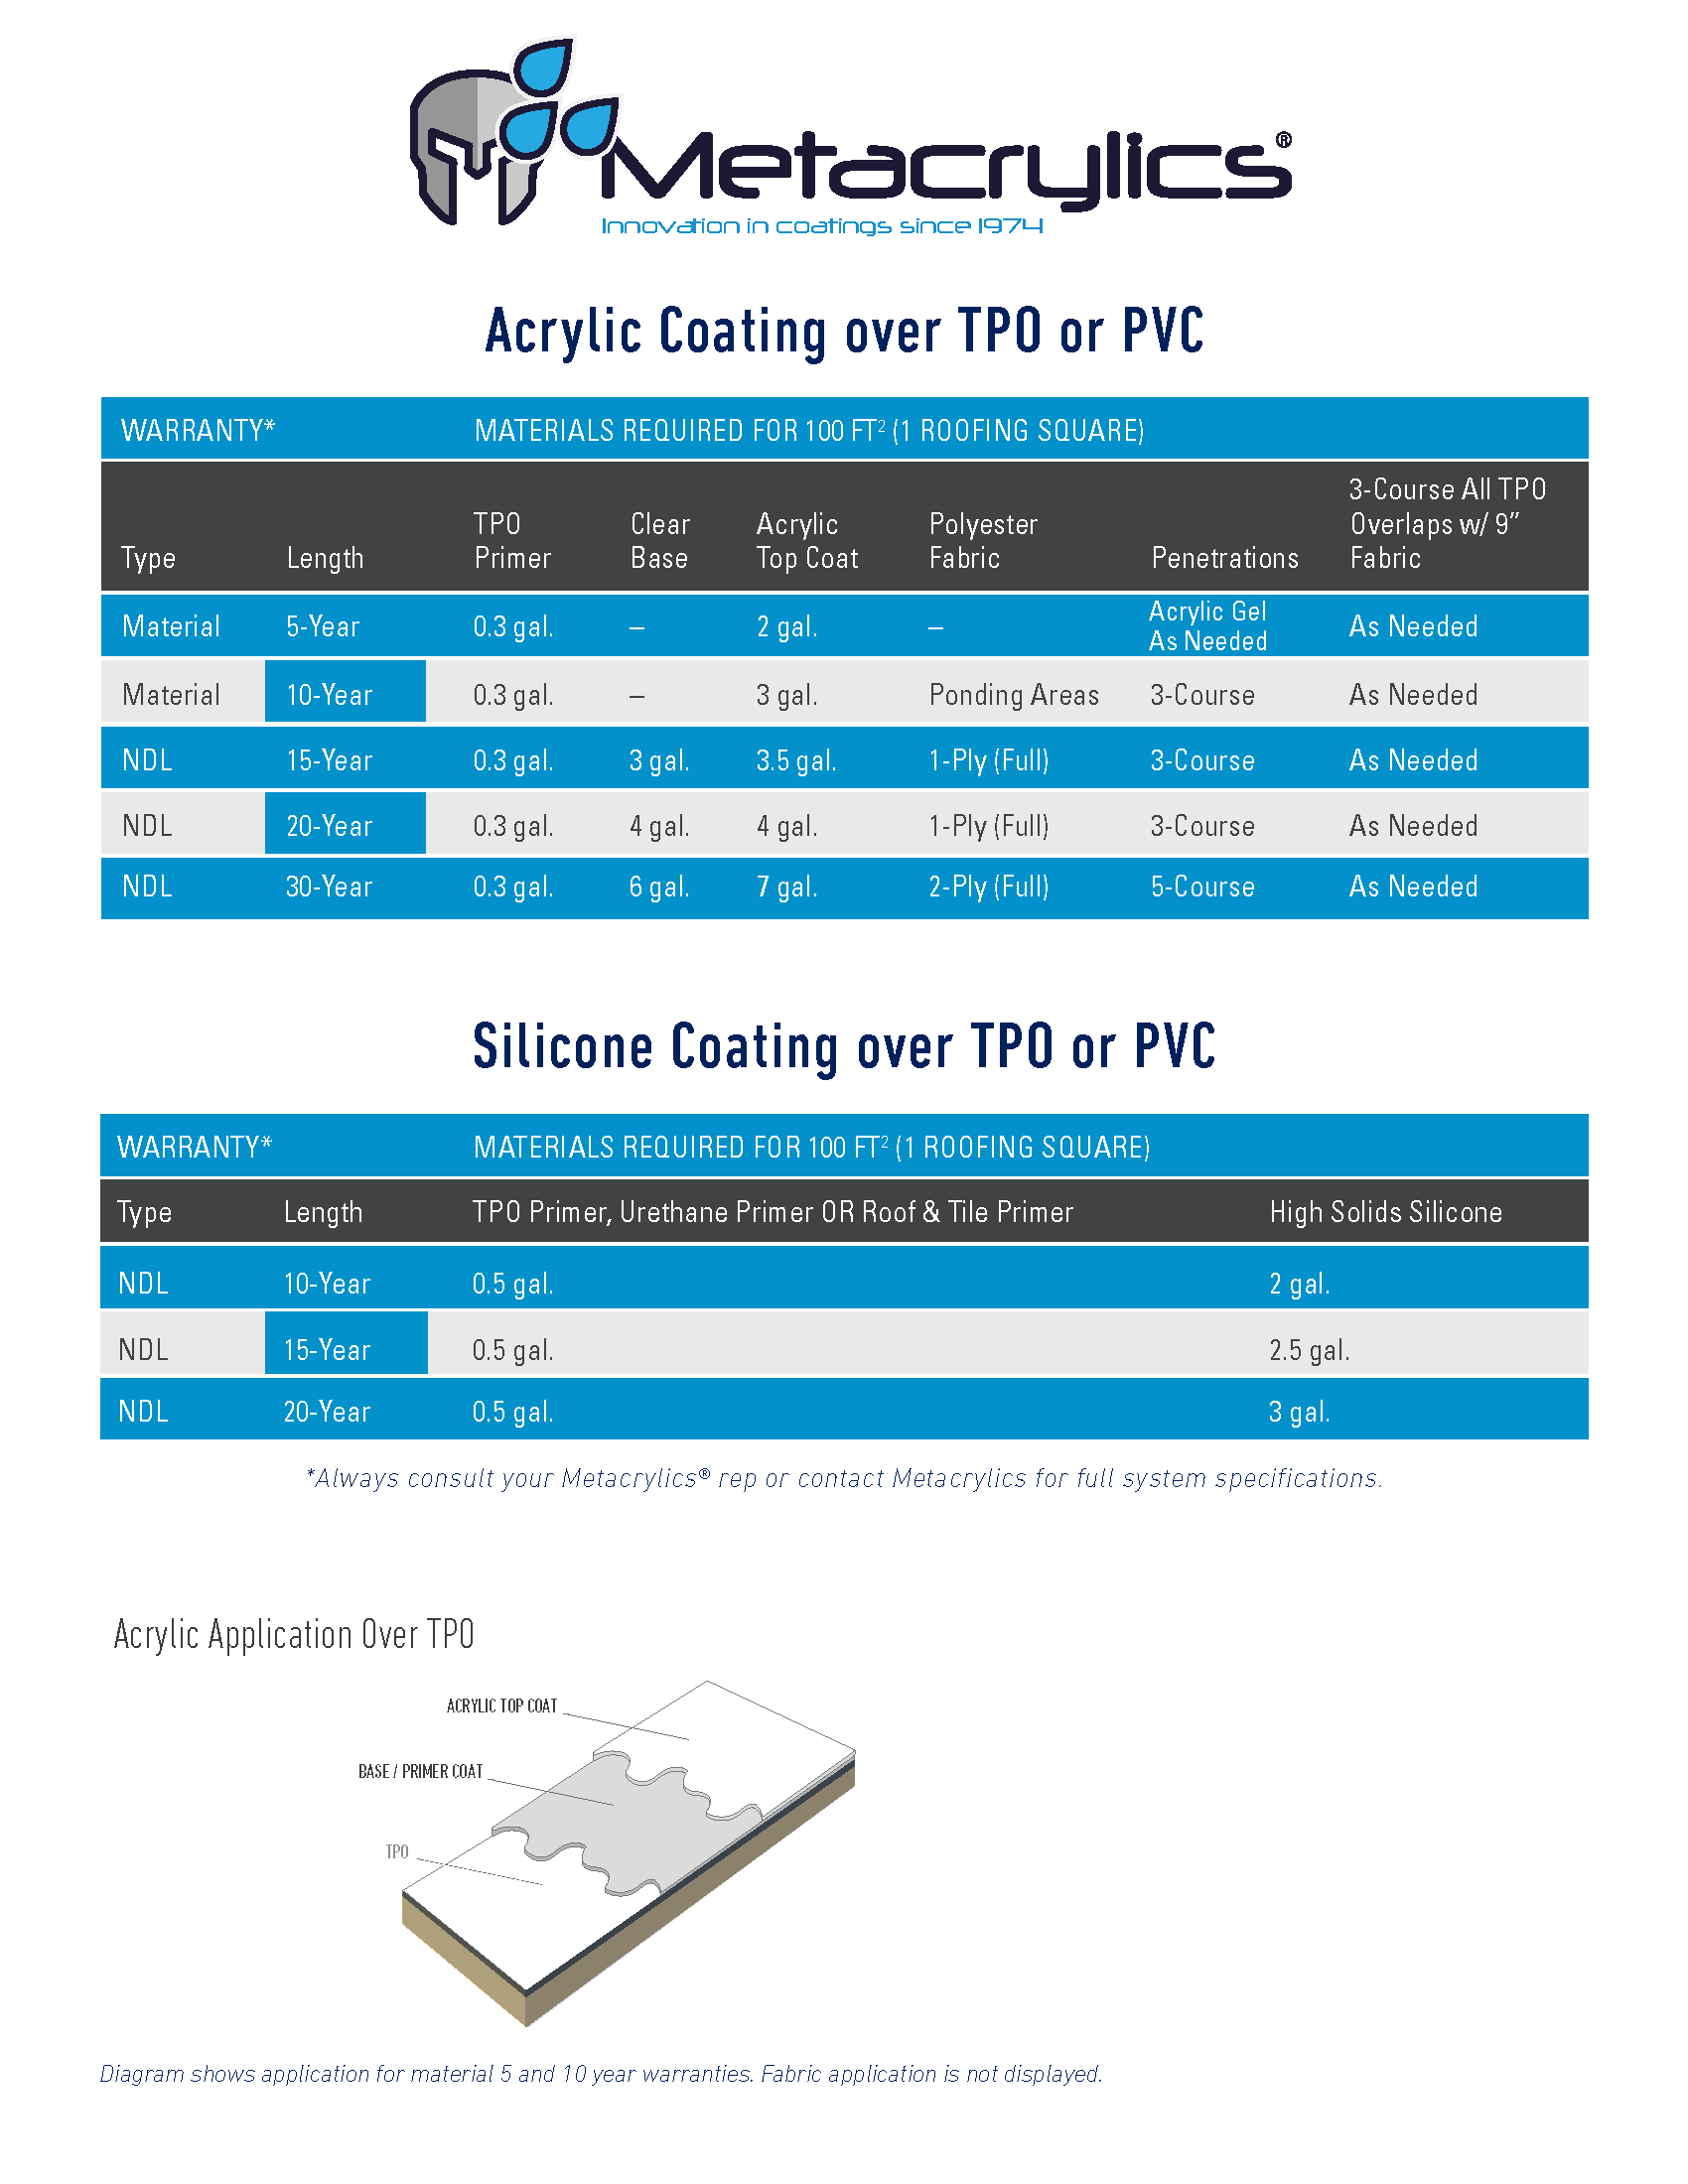 Acrylic and Silicone Coating Over TPO or PVC